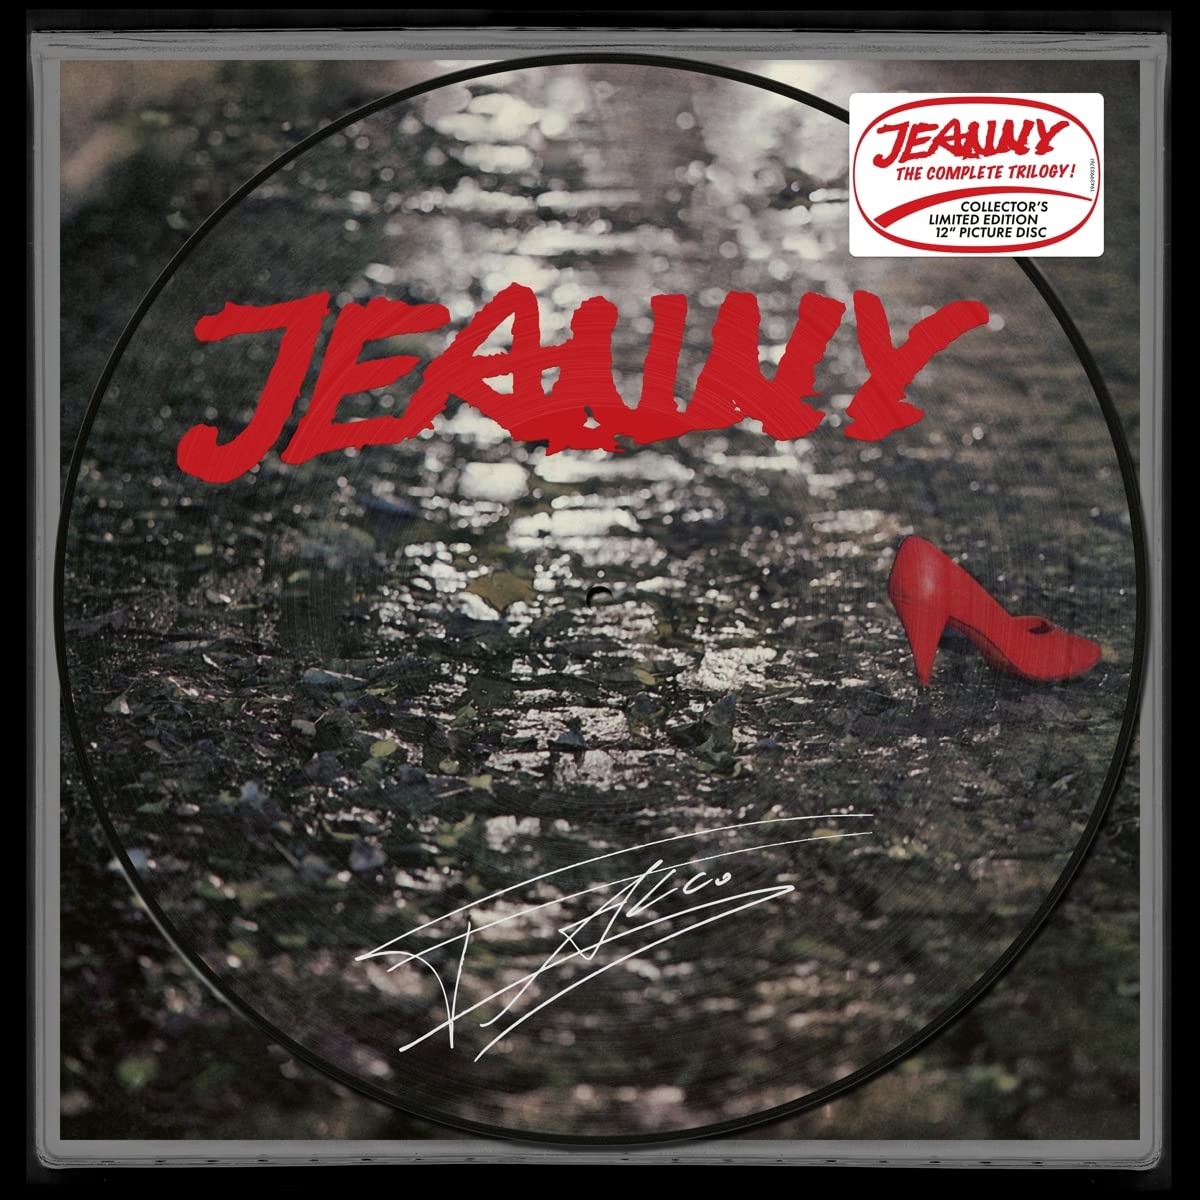 Jeanny - The Complete Trilogy! (PICTURE Vinyl)